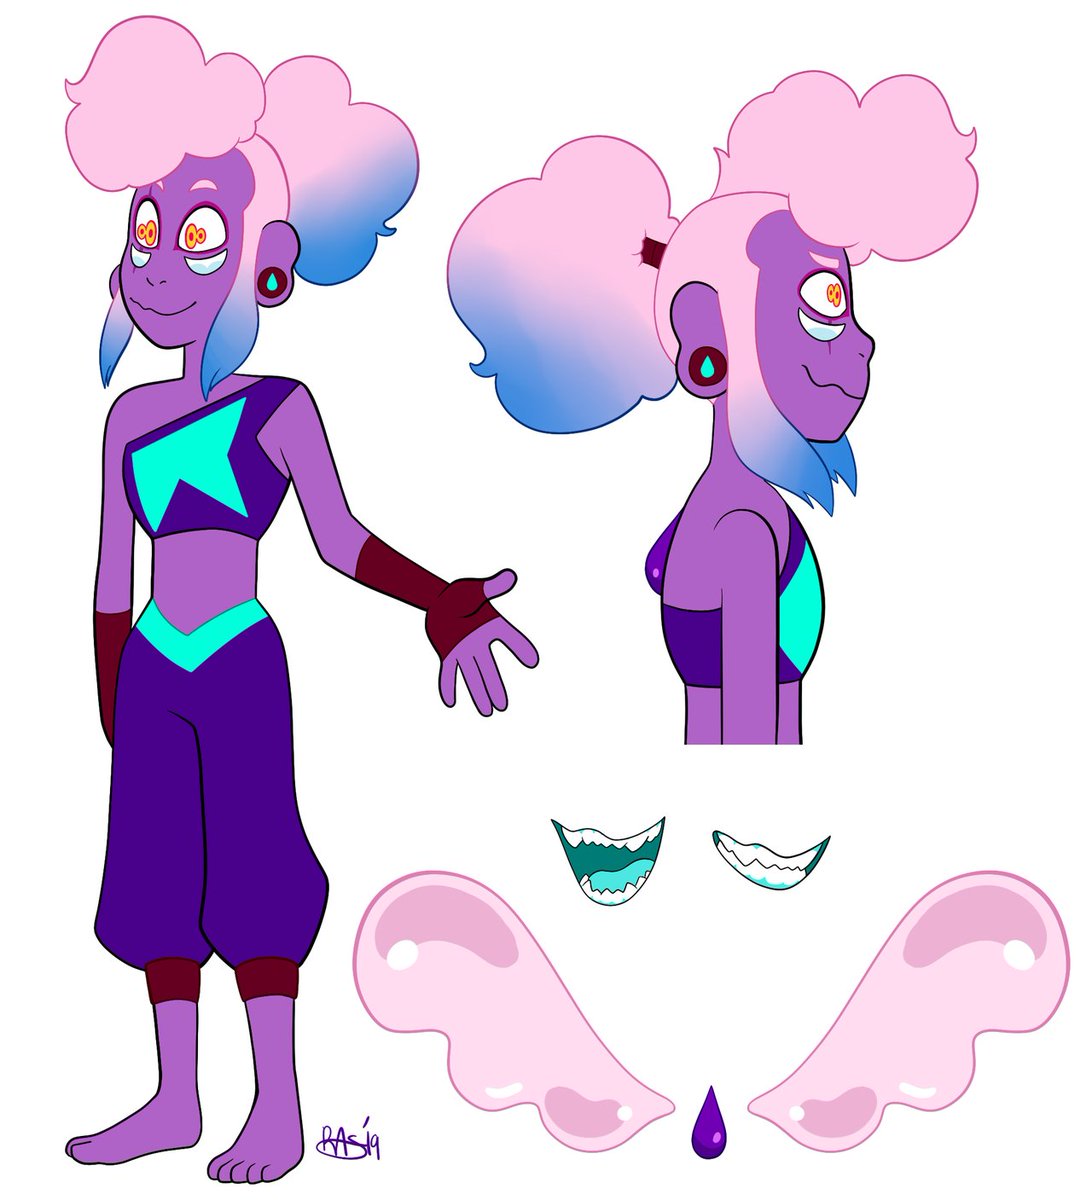 Does anybody remember Iolite? (iolite, not lolite)
This was a fun nonsensical fan fusion that I wanna draw again sometime... They like food and have 0 memory of their individual parts. 